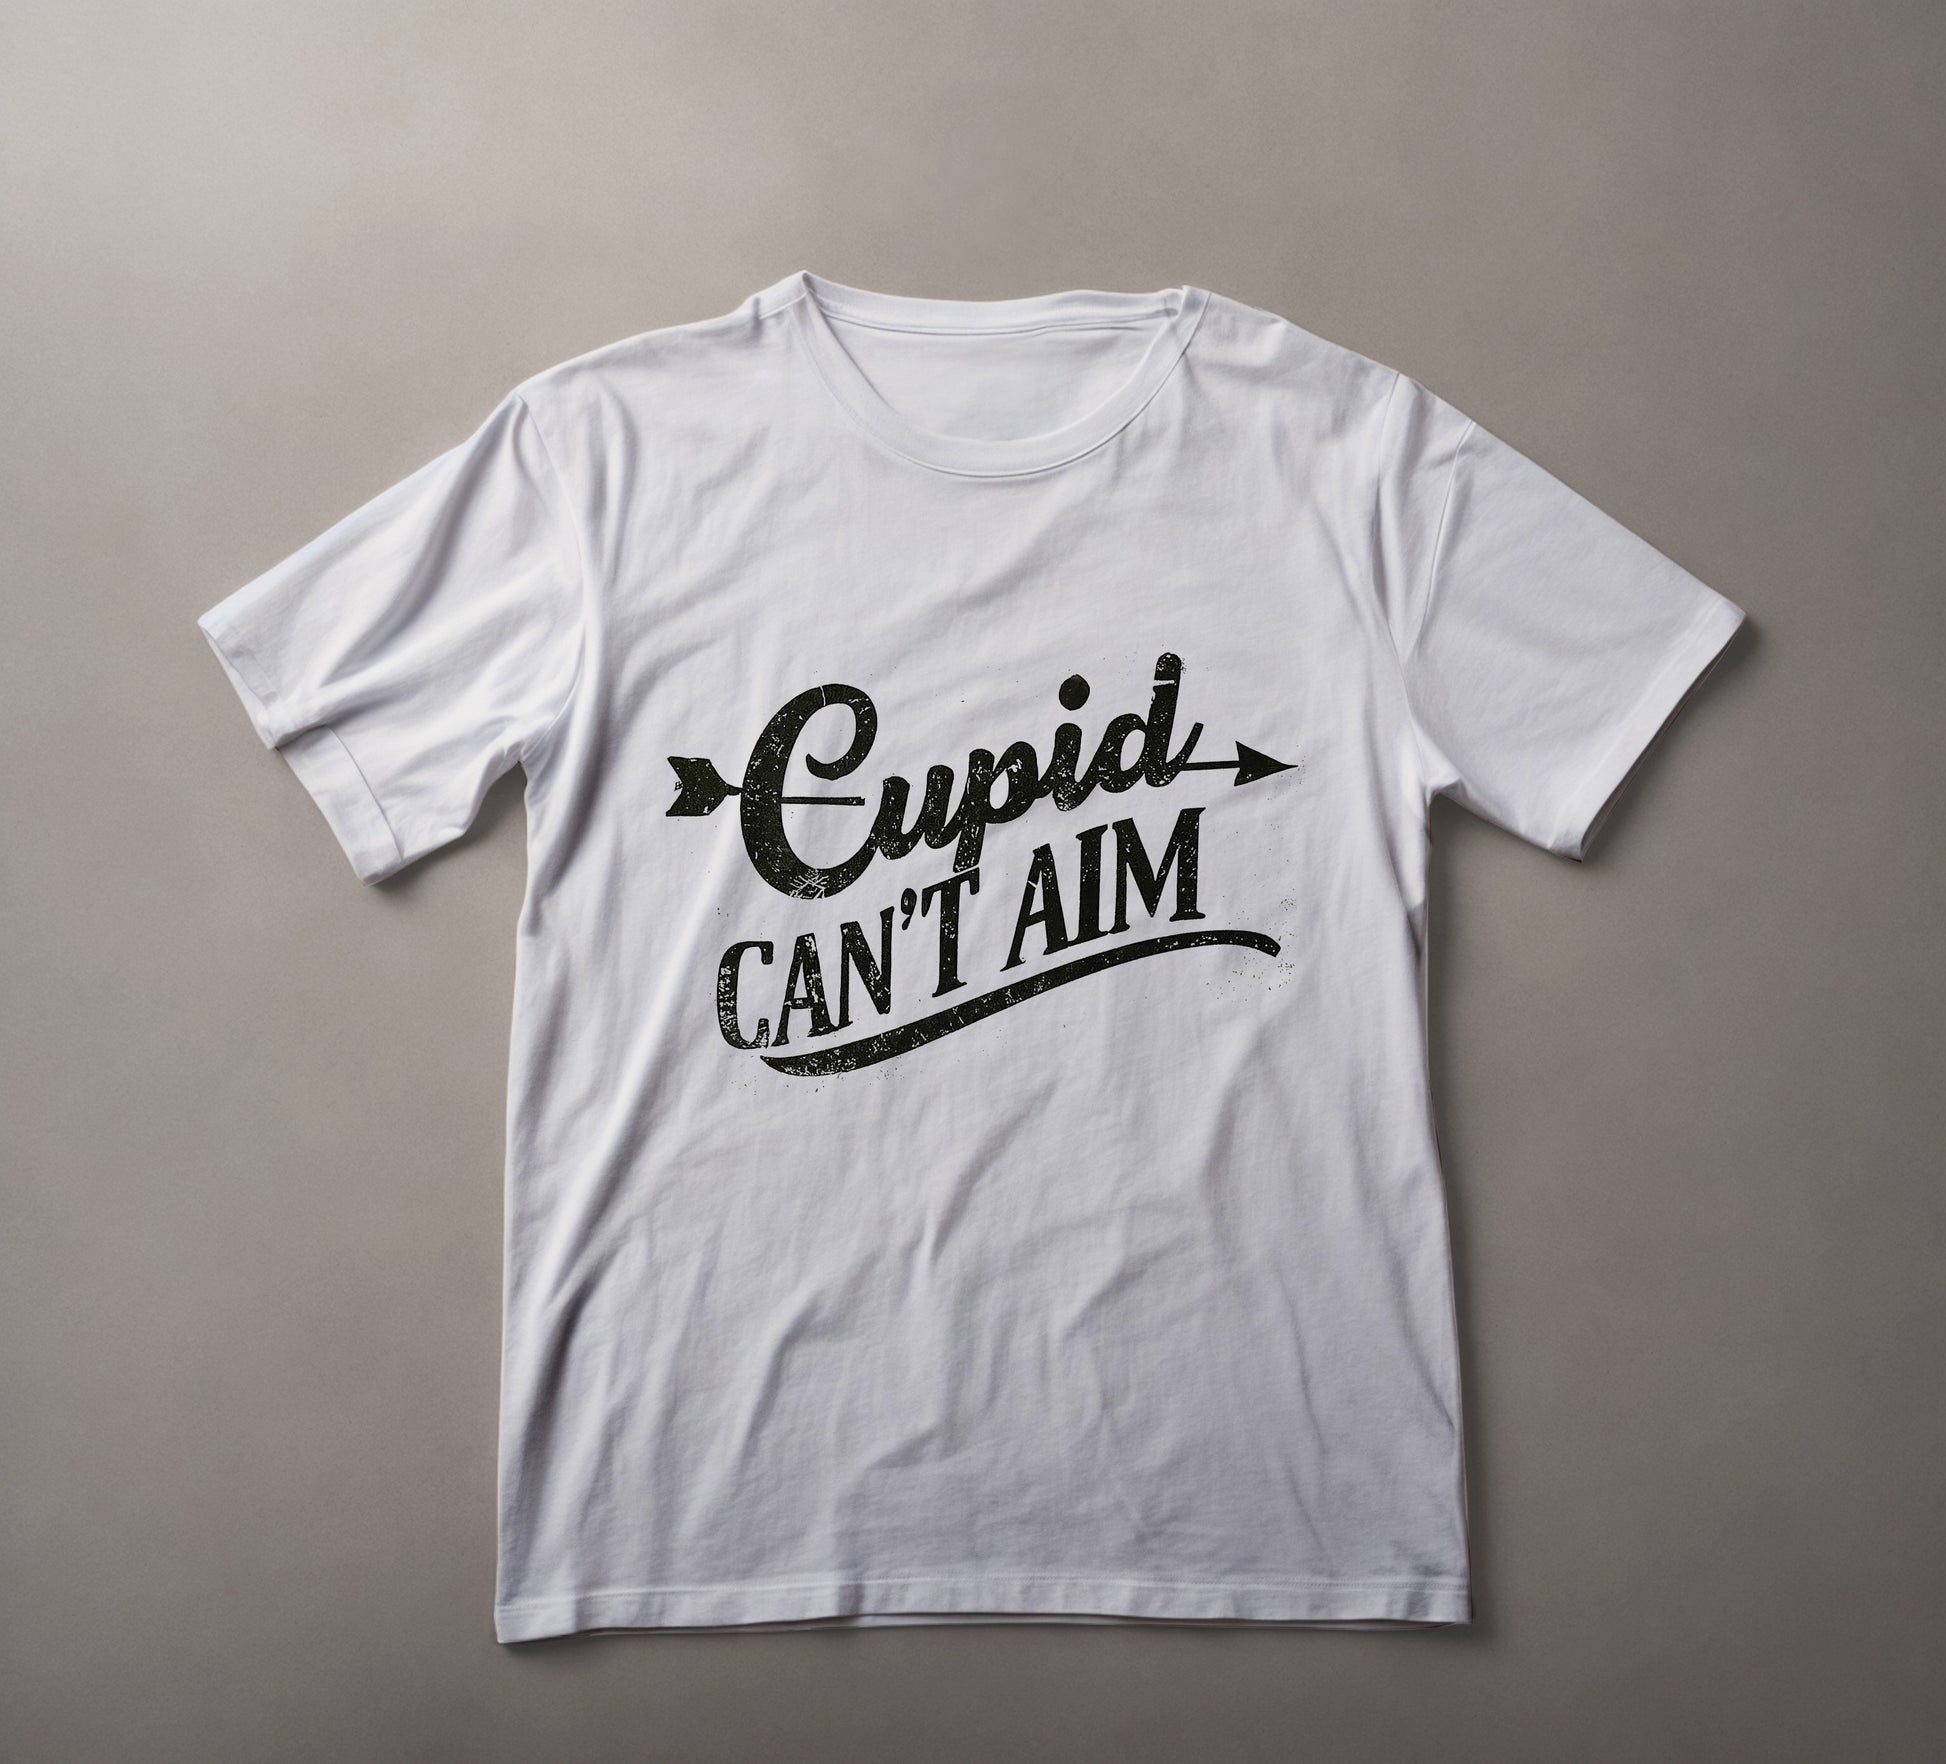 Cupid Can't Aim T-Shirt, Humorous Valentine's Tee, Funny Love Quote Shirt, Vintage Typography T-Shirt, Distressed Text Tee, Casual Wear, Romantic Humor Clothing, Conversation Starter Shirt, Playful Cupid Design, Singles Apparel, Gift for Friends